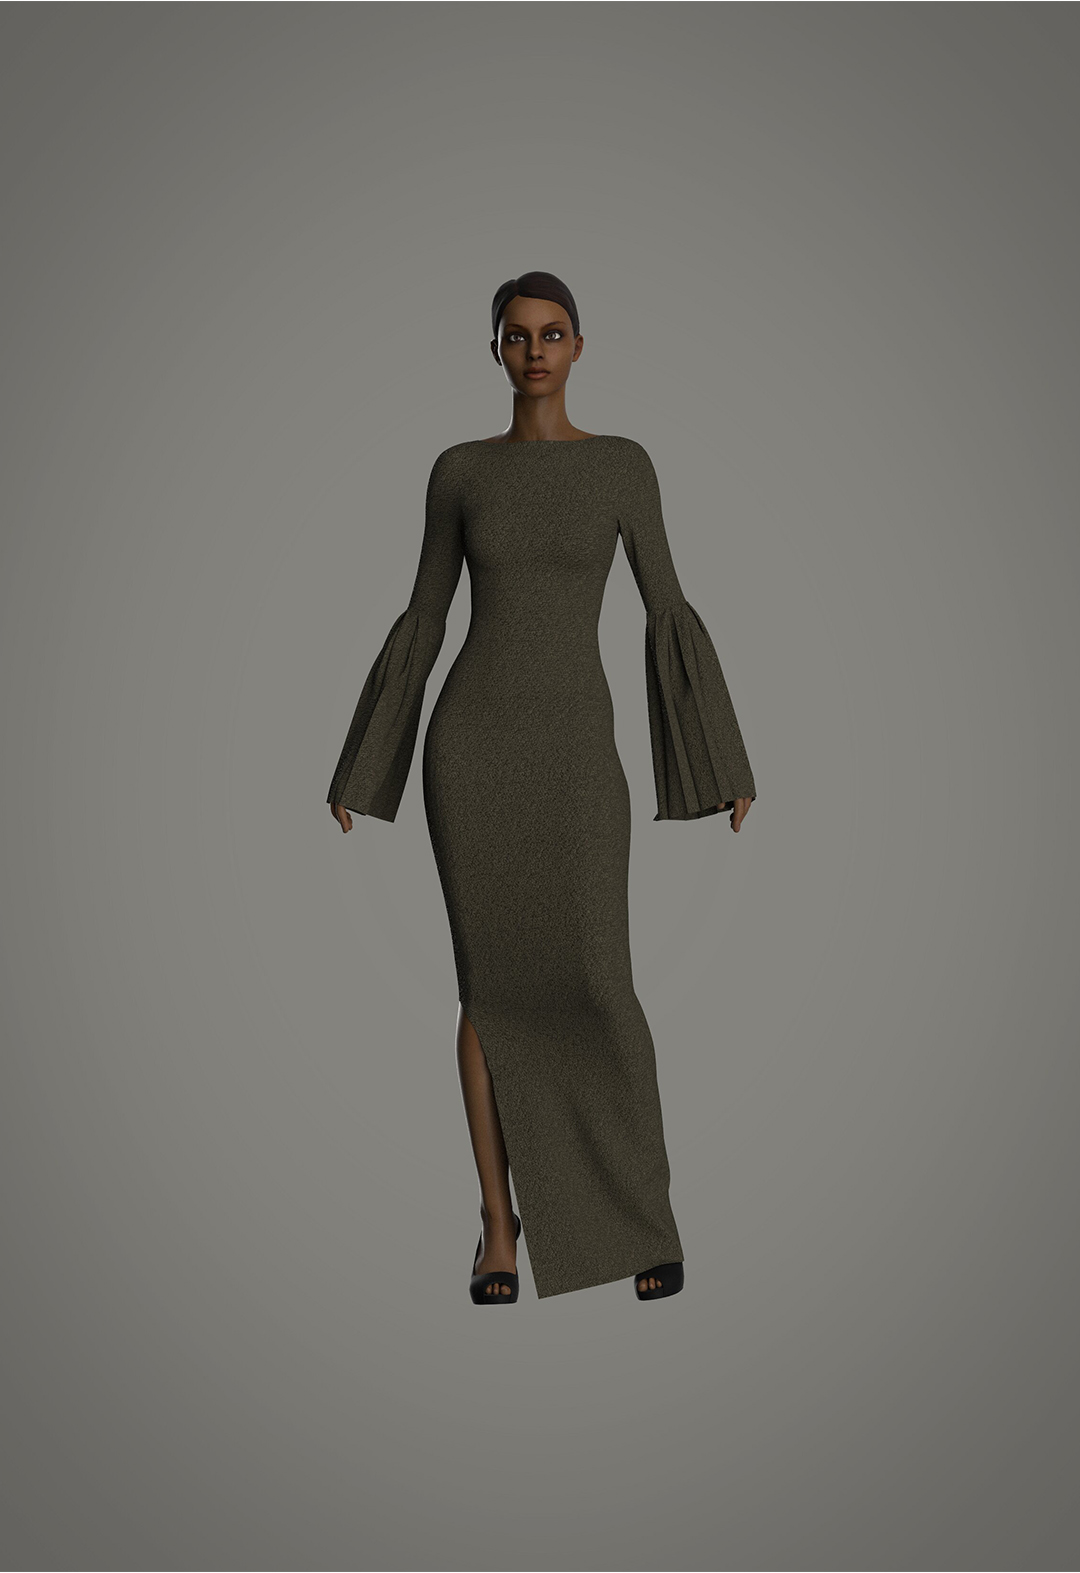 3D avatar wearing a black-and-gold knit corseted maxi dress with a side slit.The avatar's arms are away from the body to show the pleated sleeves. The background is gray.